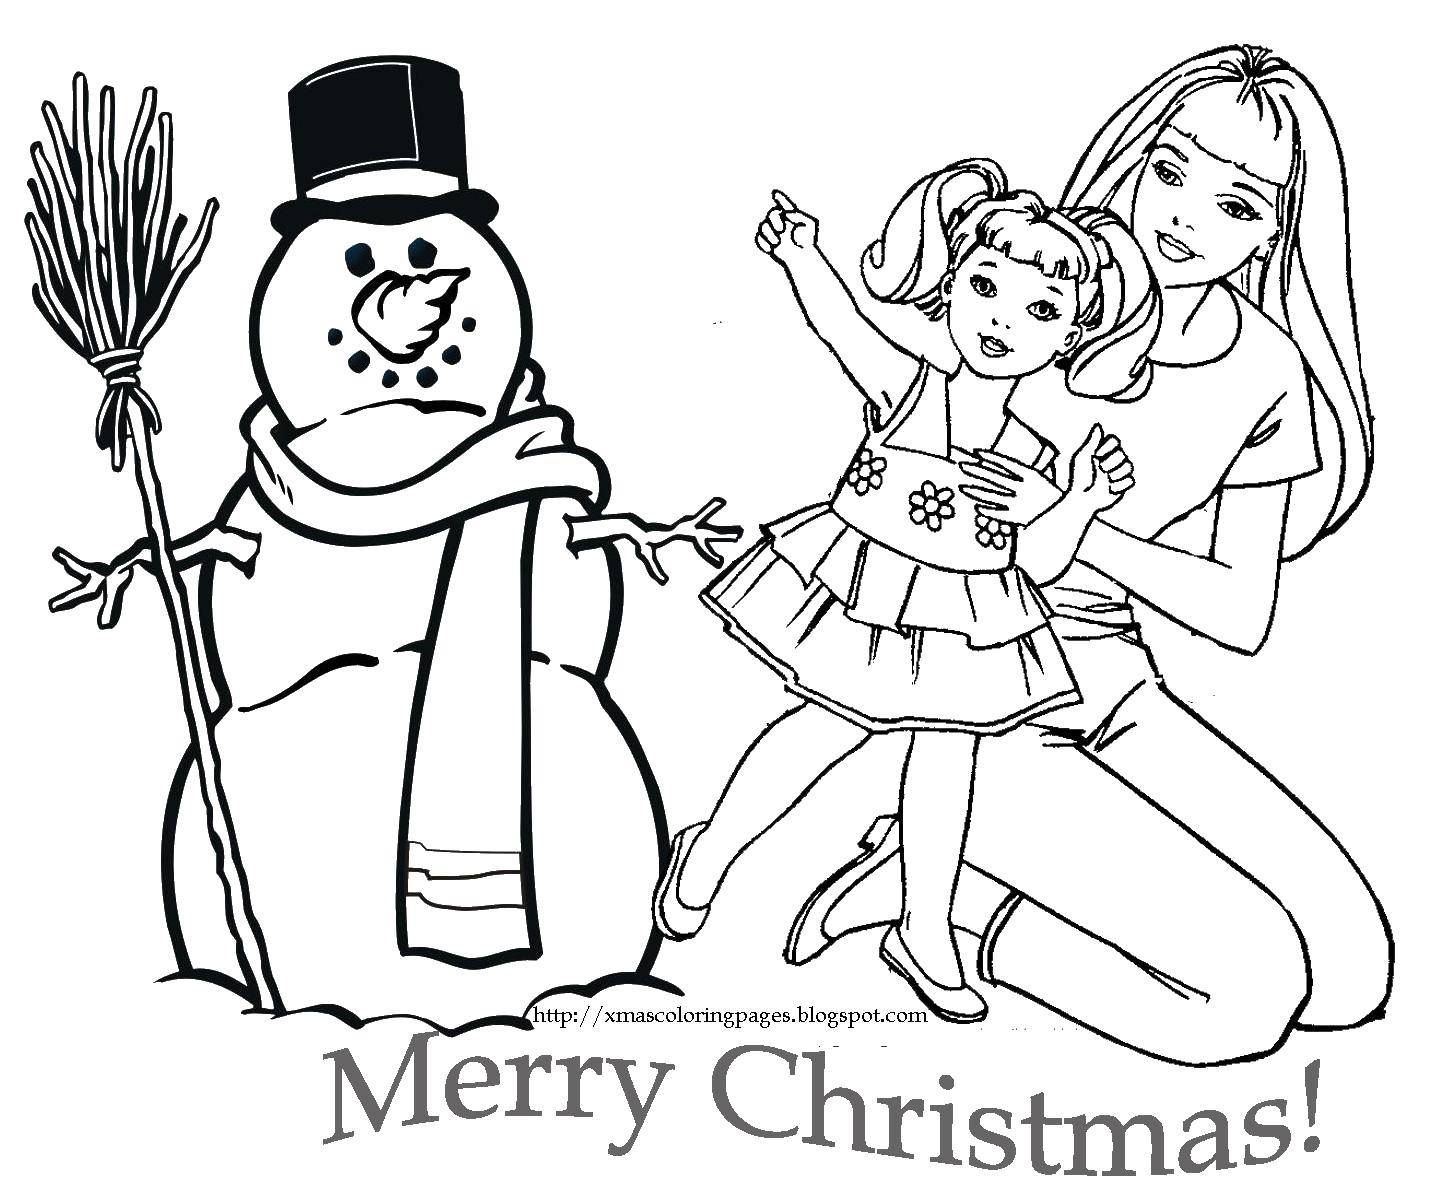 Coloring Barbie and the snowman. Category Barbie . Tags:  Barbie , Christmas, snowman.